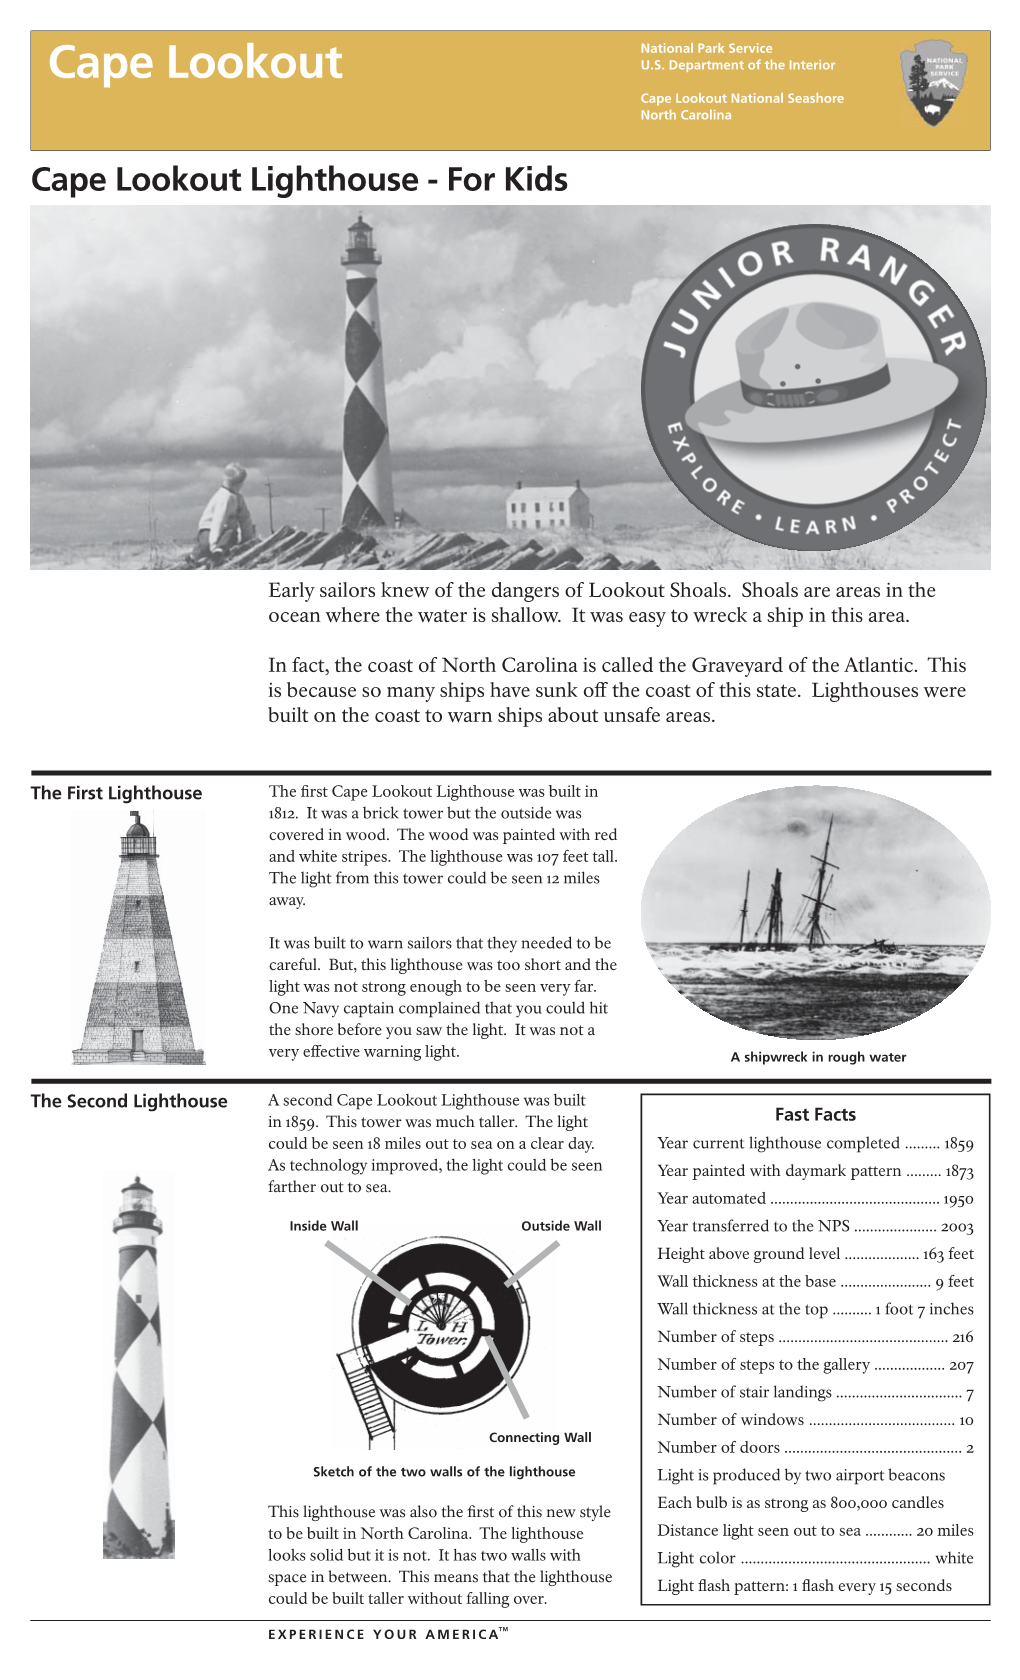 Cape Lookout Lighthouse - for Kids